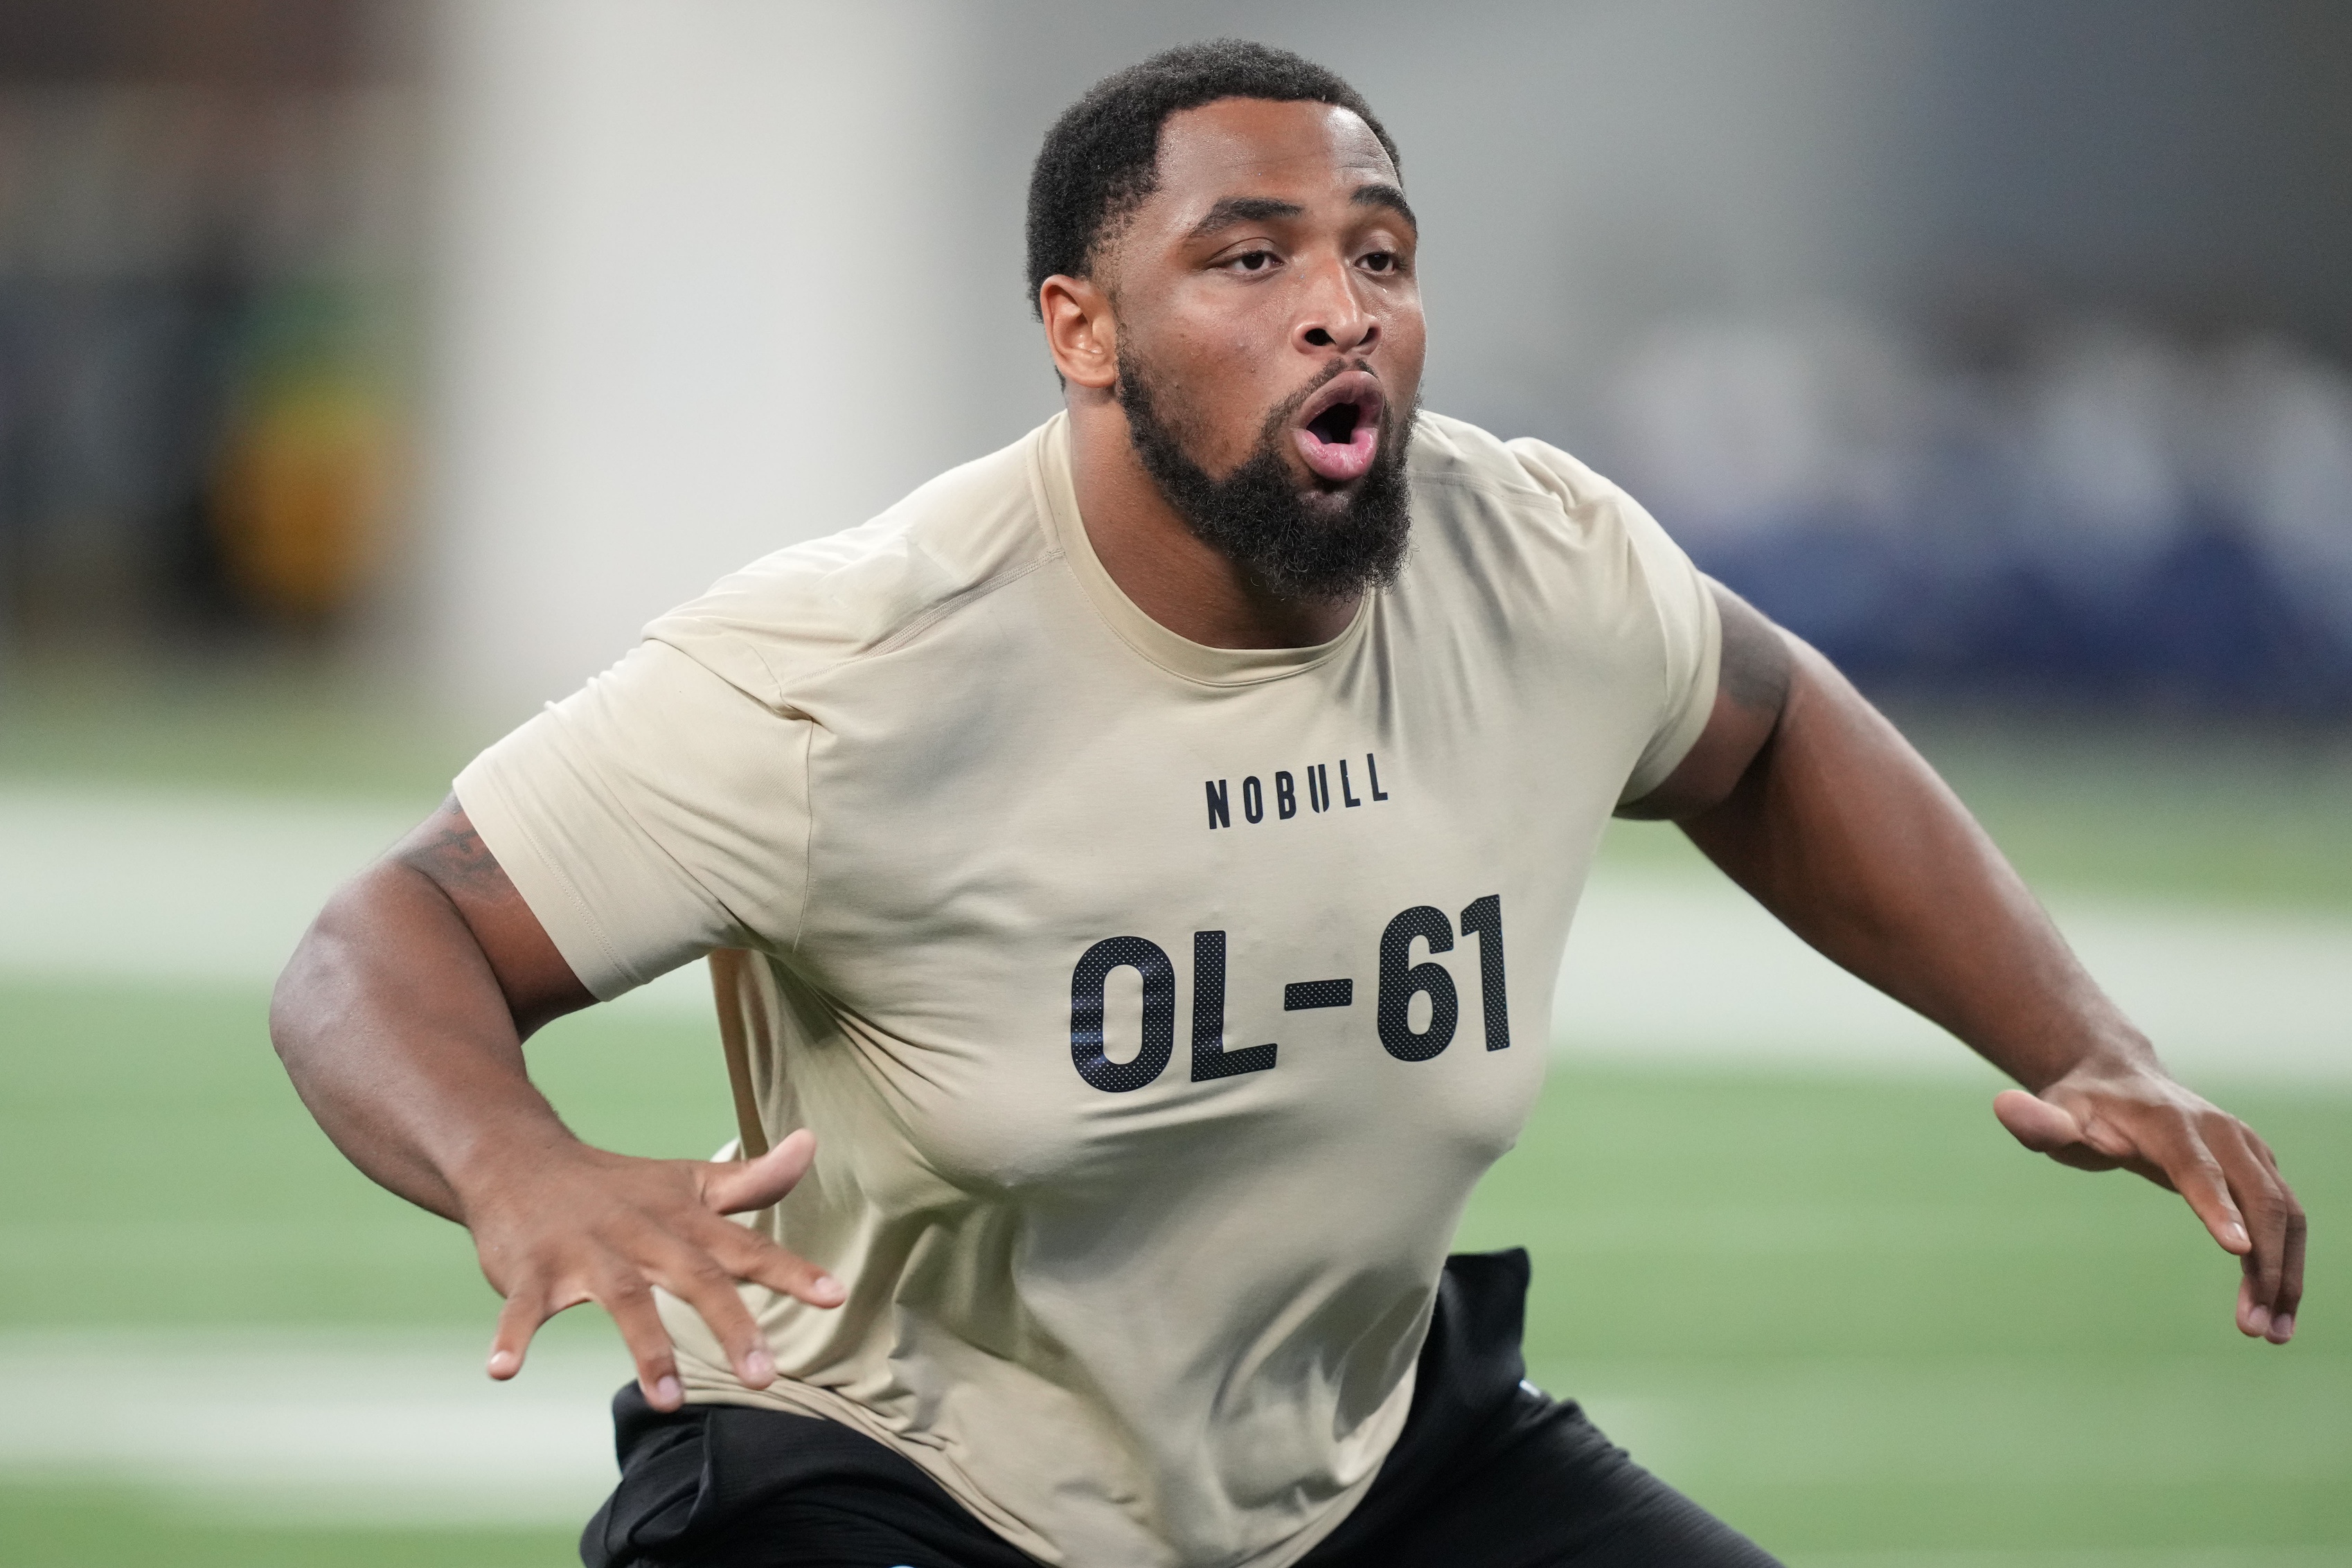 One of the Las Vegas Raiders' focuses in the draft should be adding depth to their guard room. Selecting a guard like Layden Robinson would help them in that endeavor.